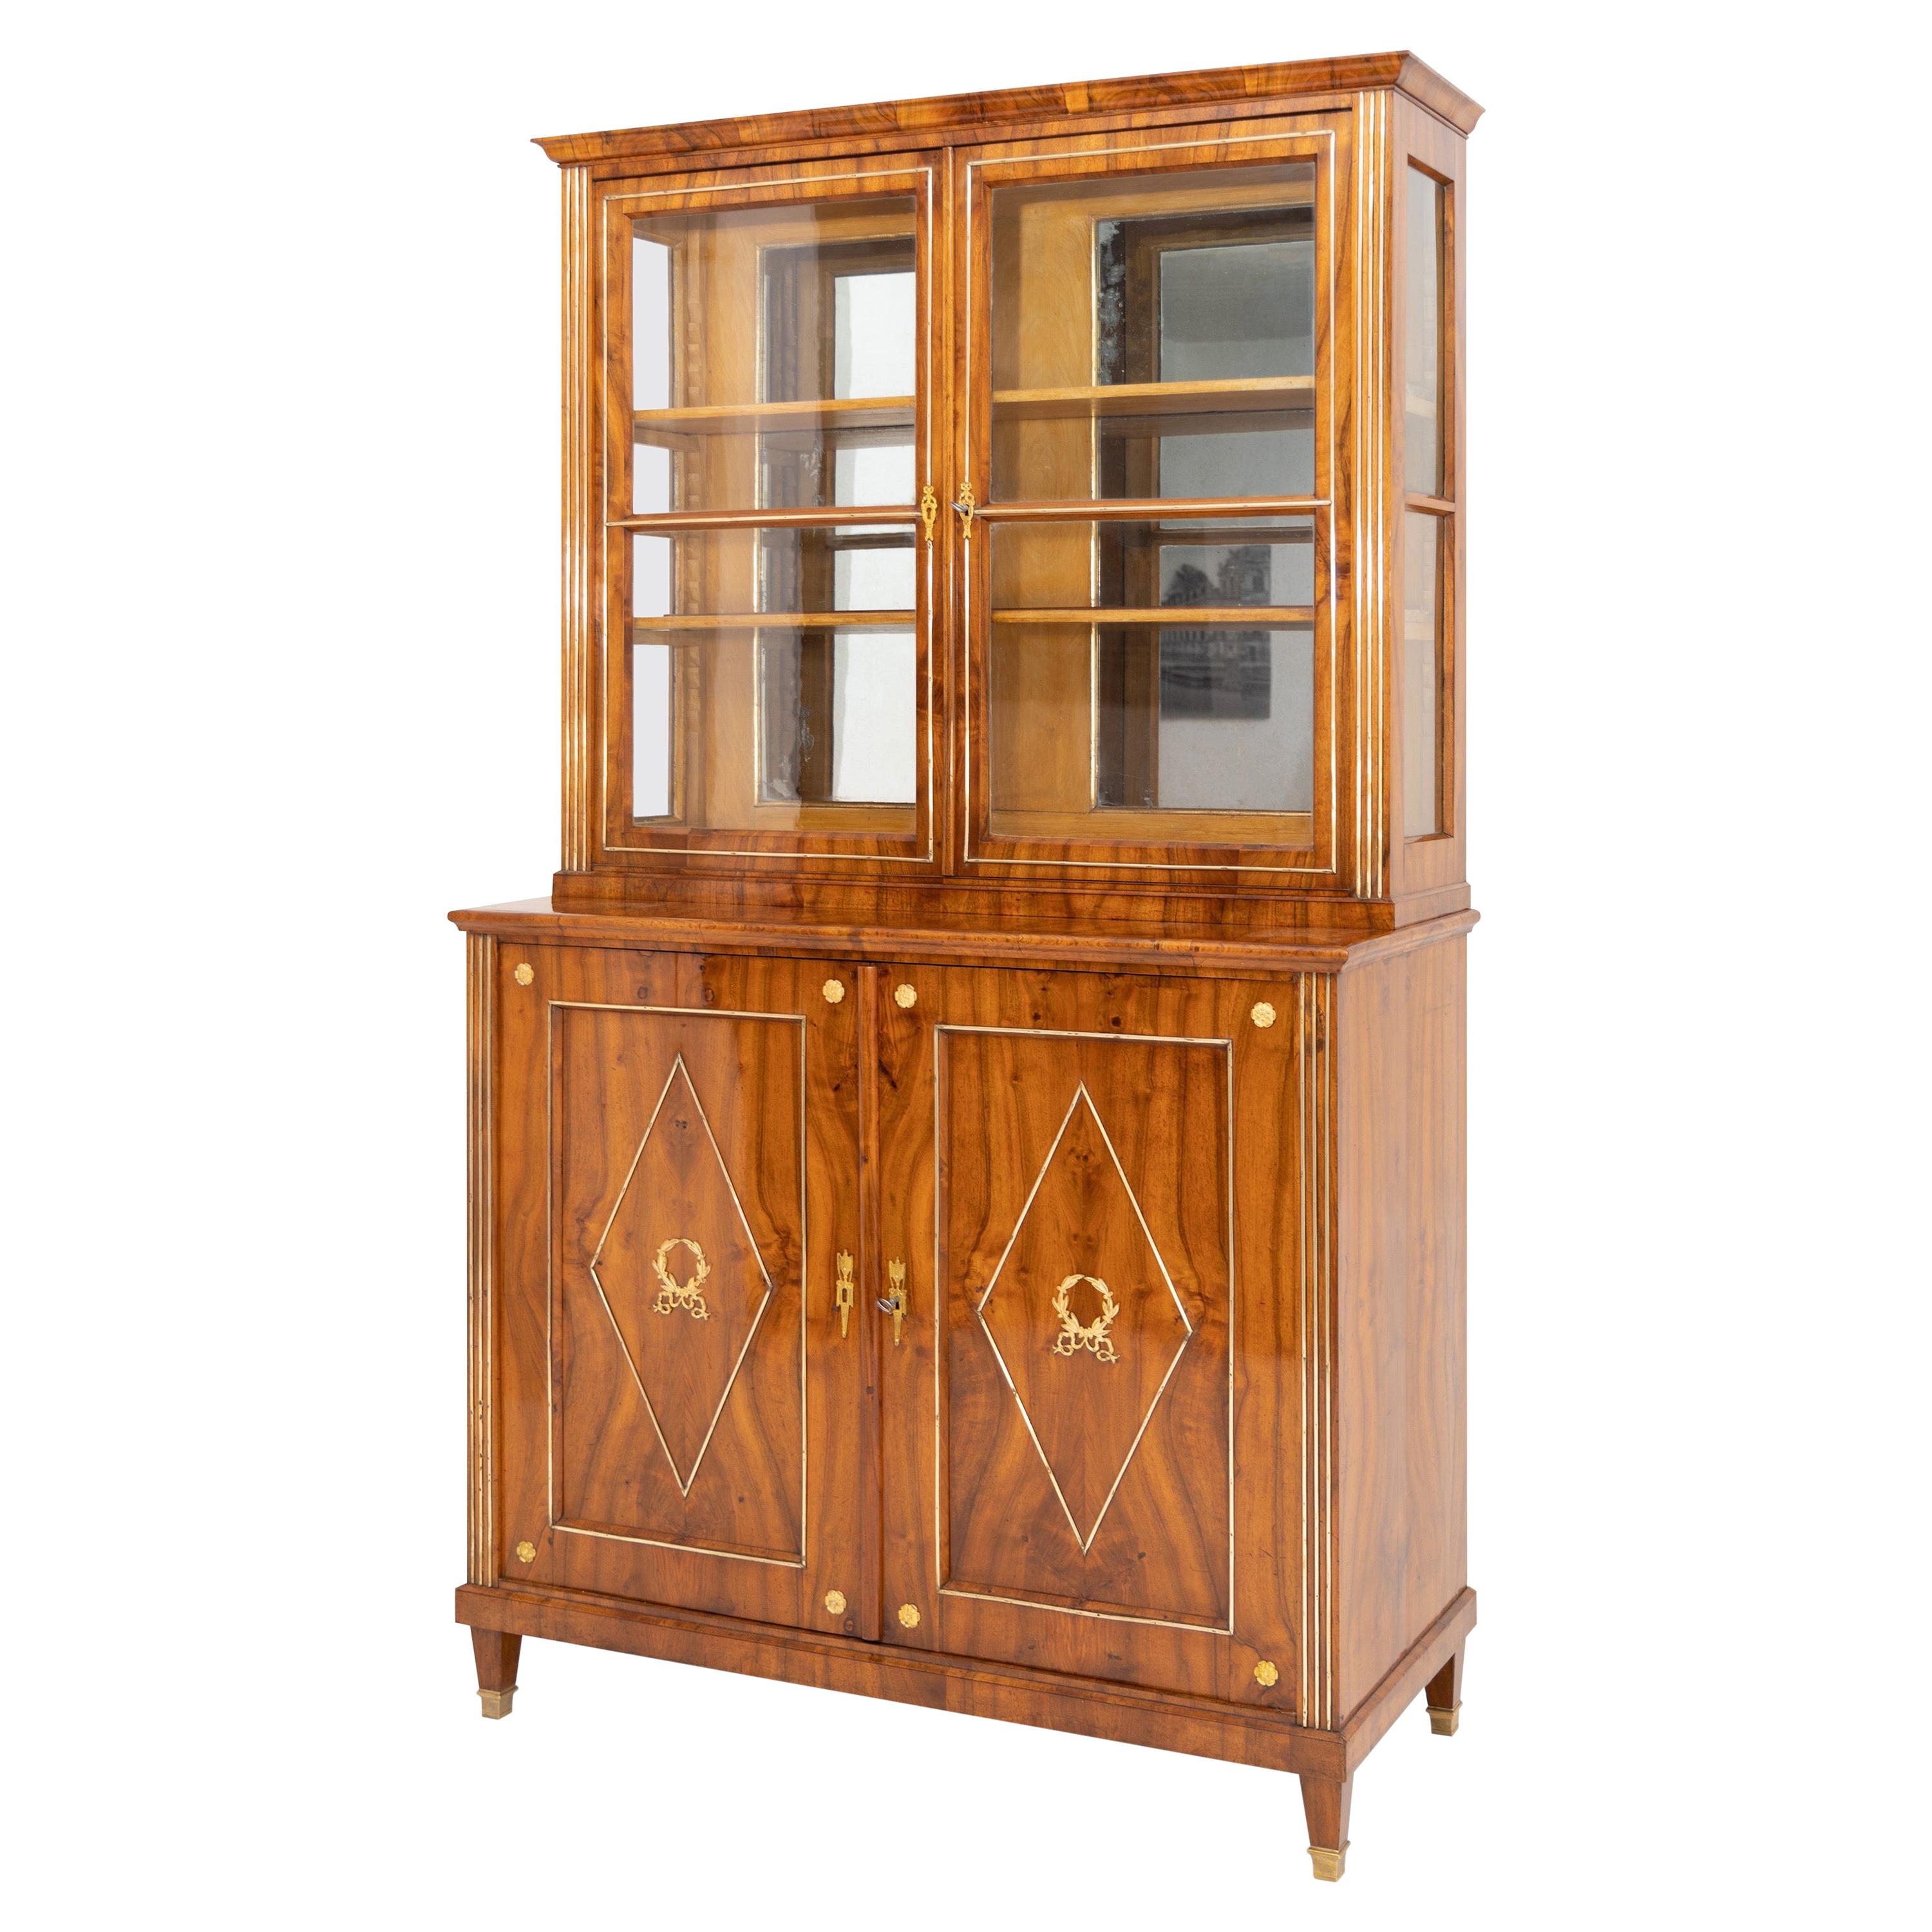 Empire Display Cabinet, Walnut, France, Early 19th Century